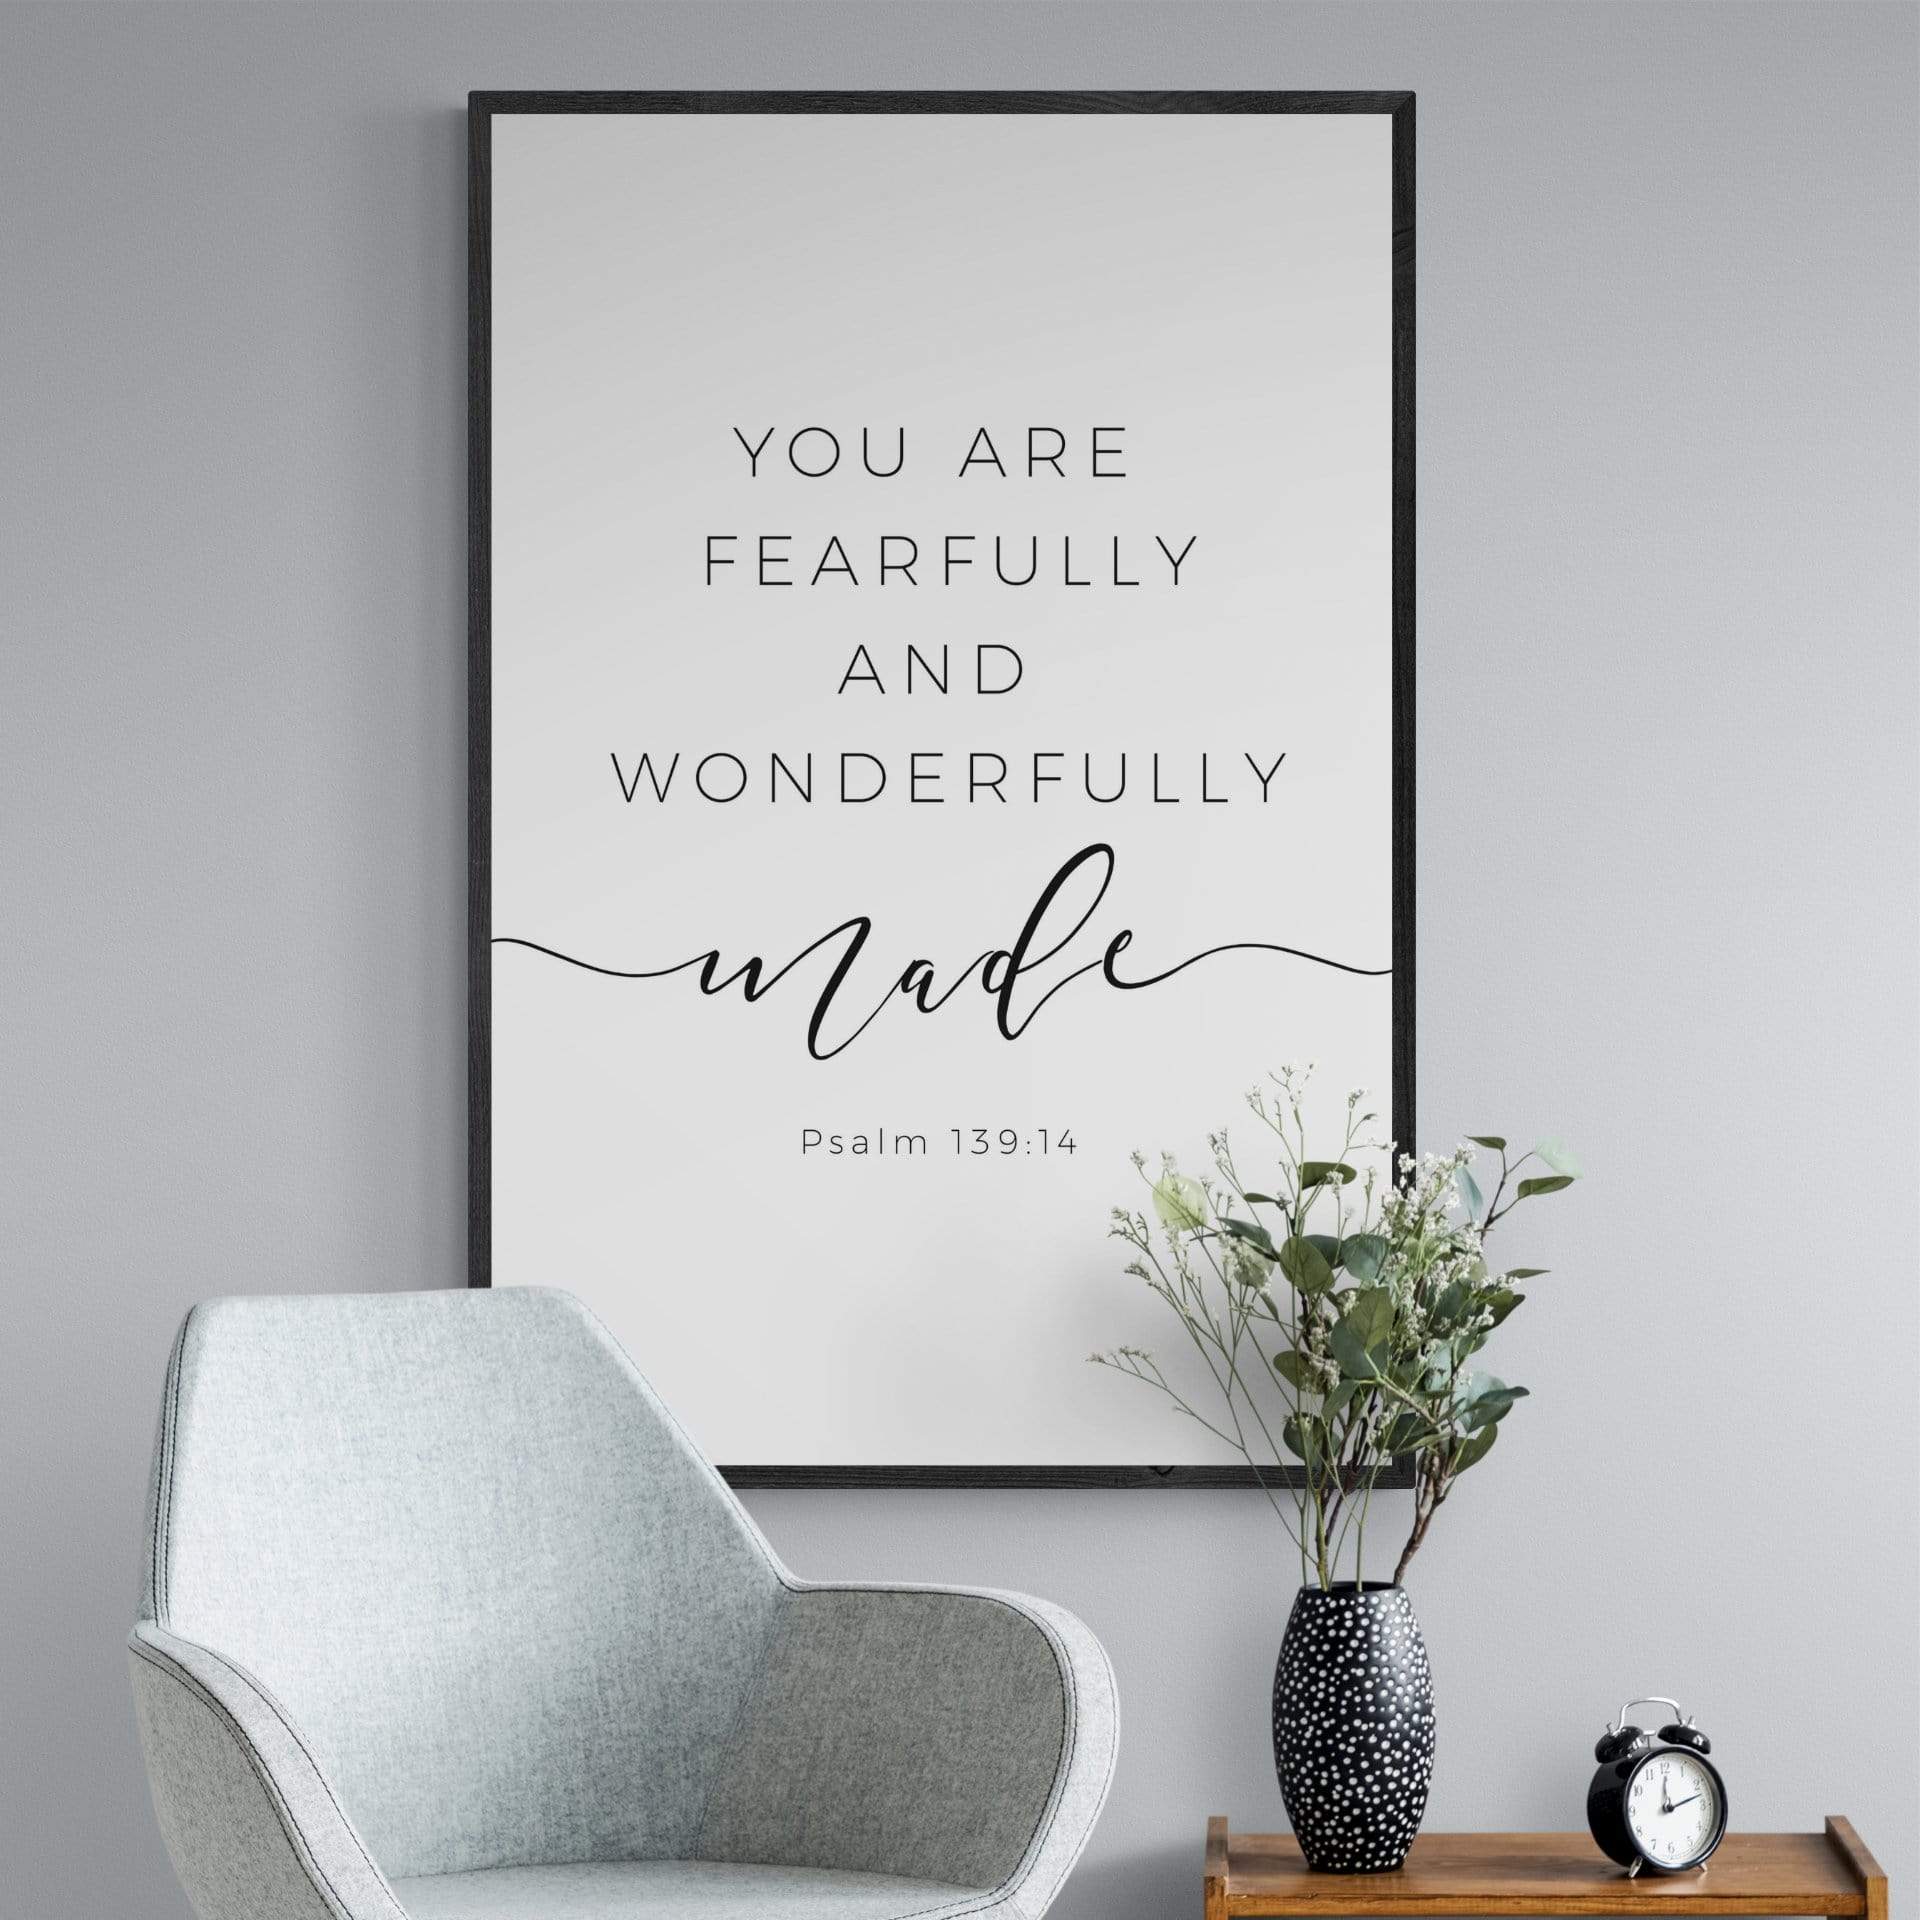 Living Words Wall Decor You are Fearfully